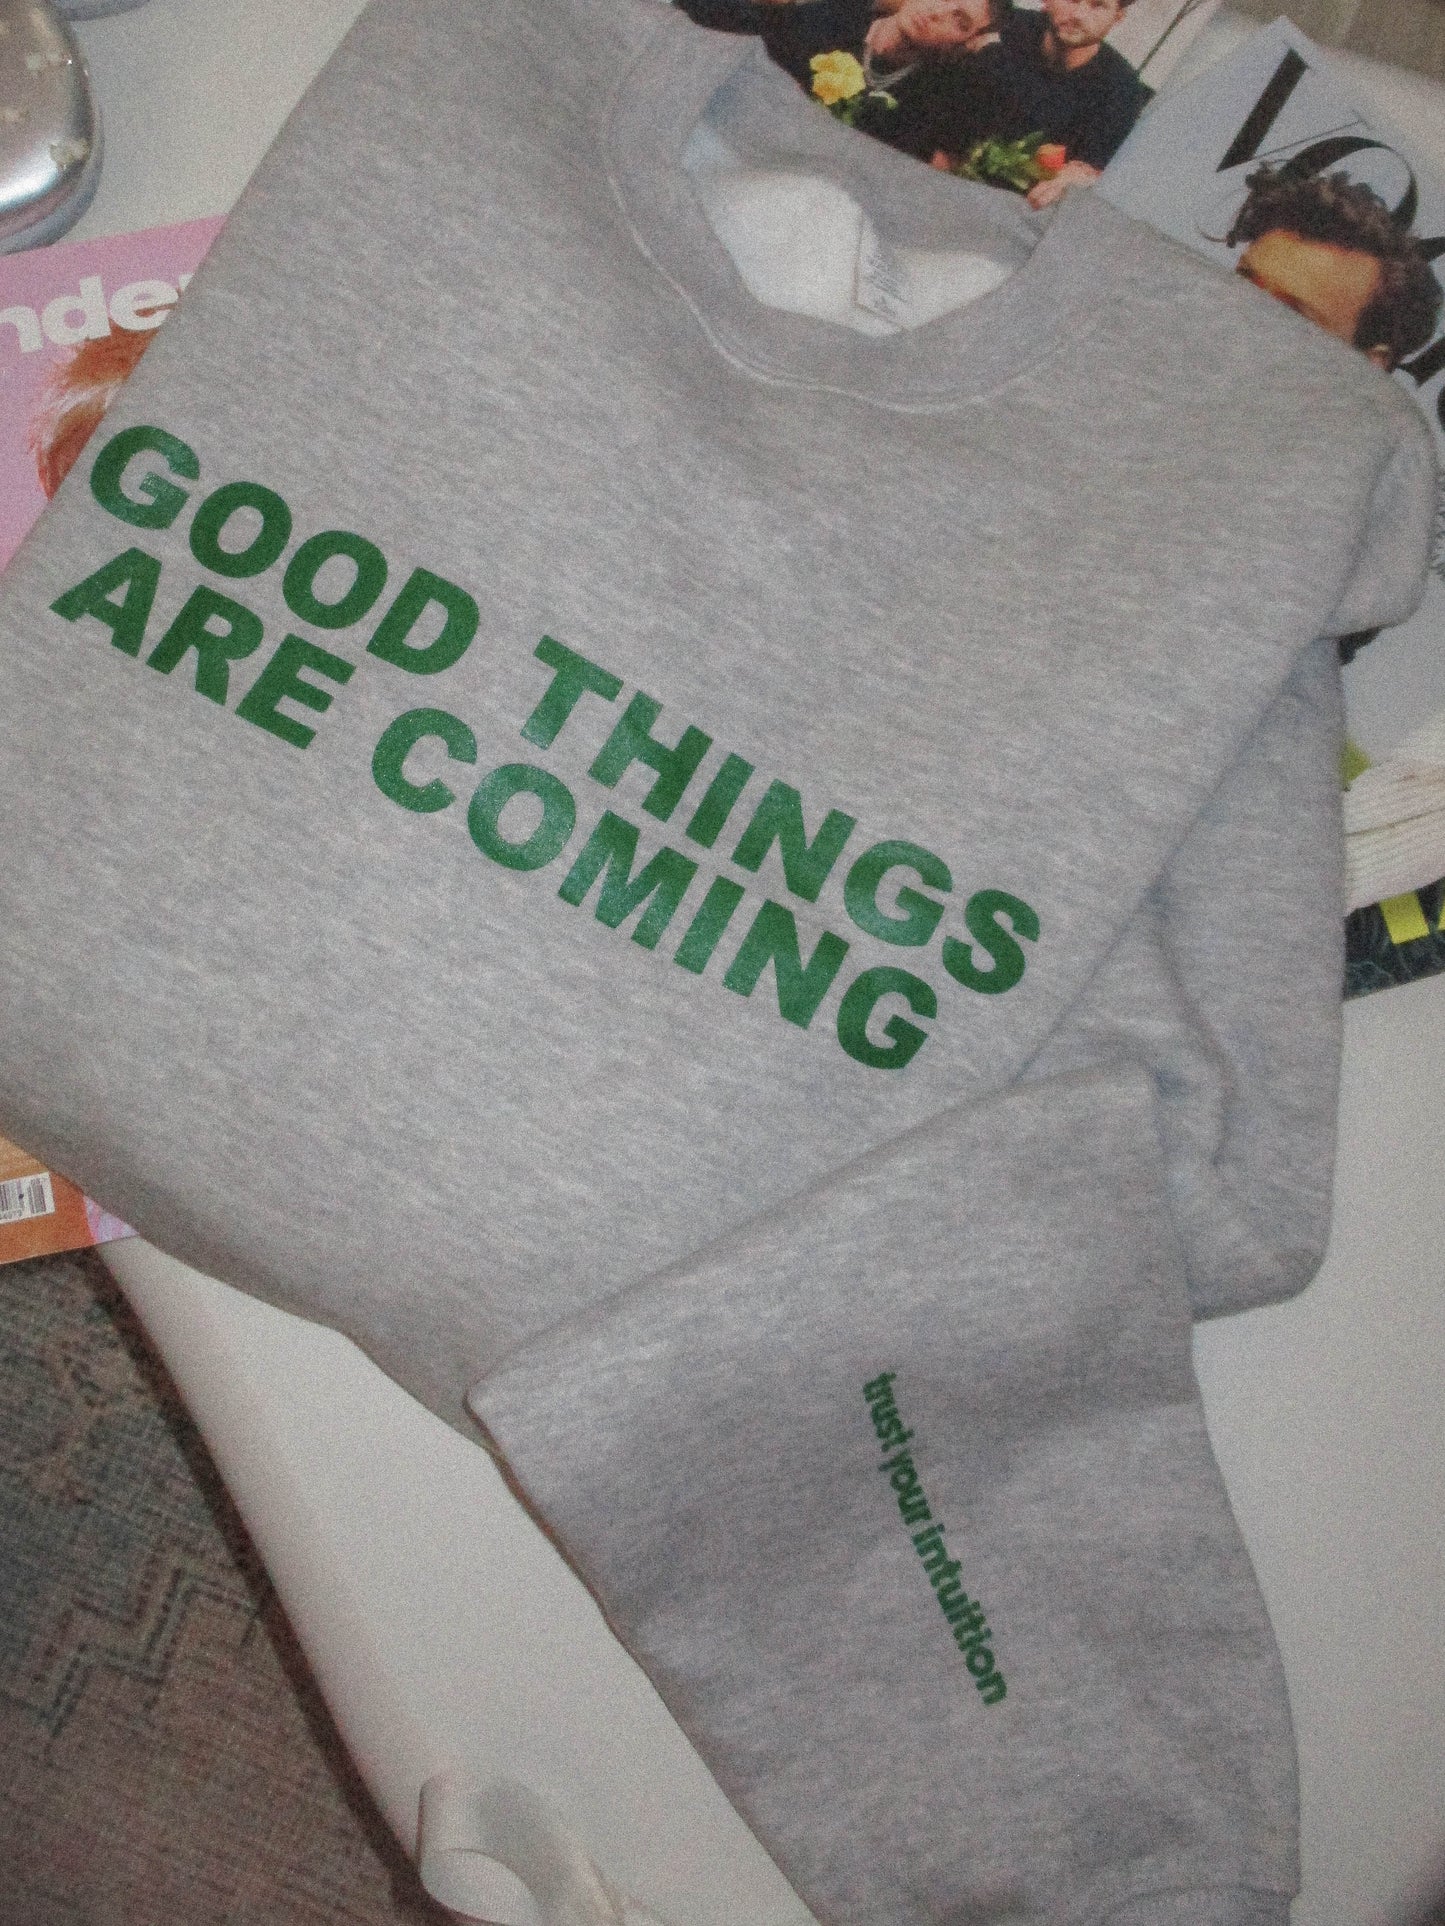 Good things are Coming Crewneck